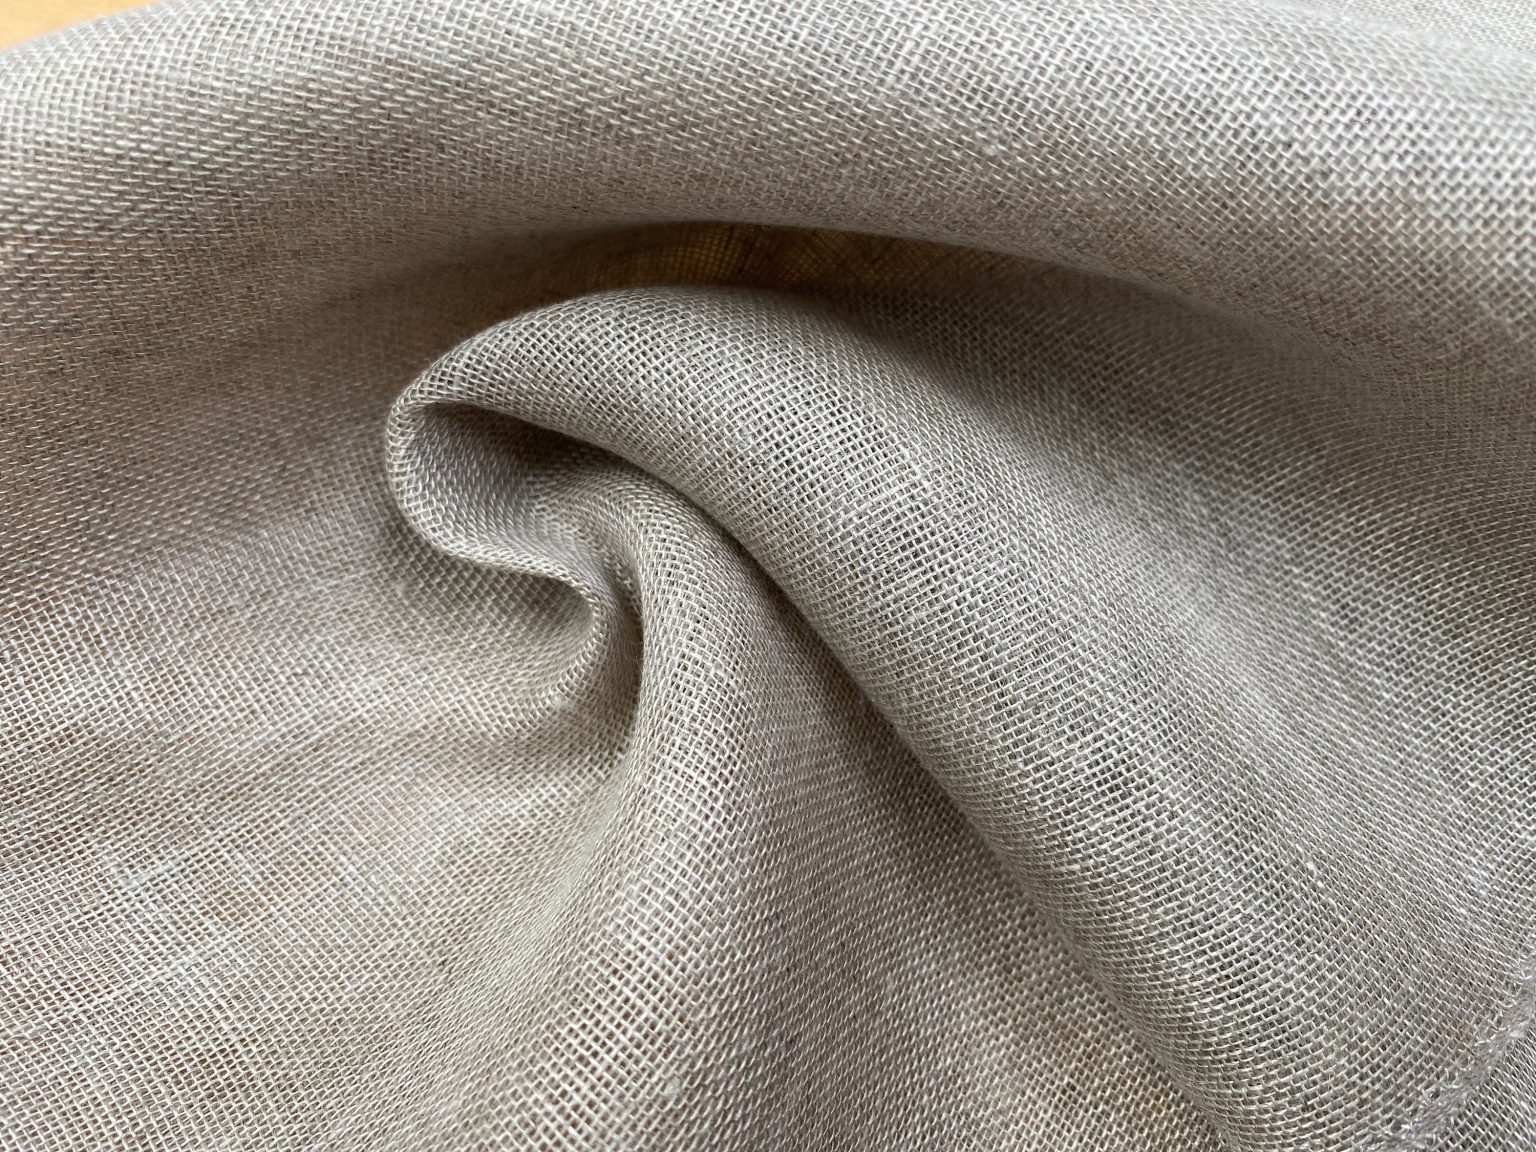 Extra Wide 100% Linen Fabric - Soft Linen Material for Home Decor